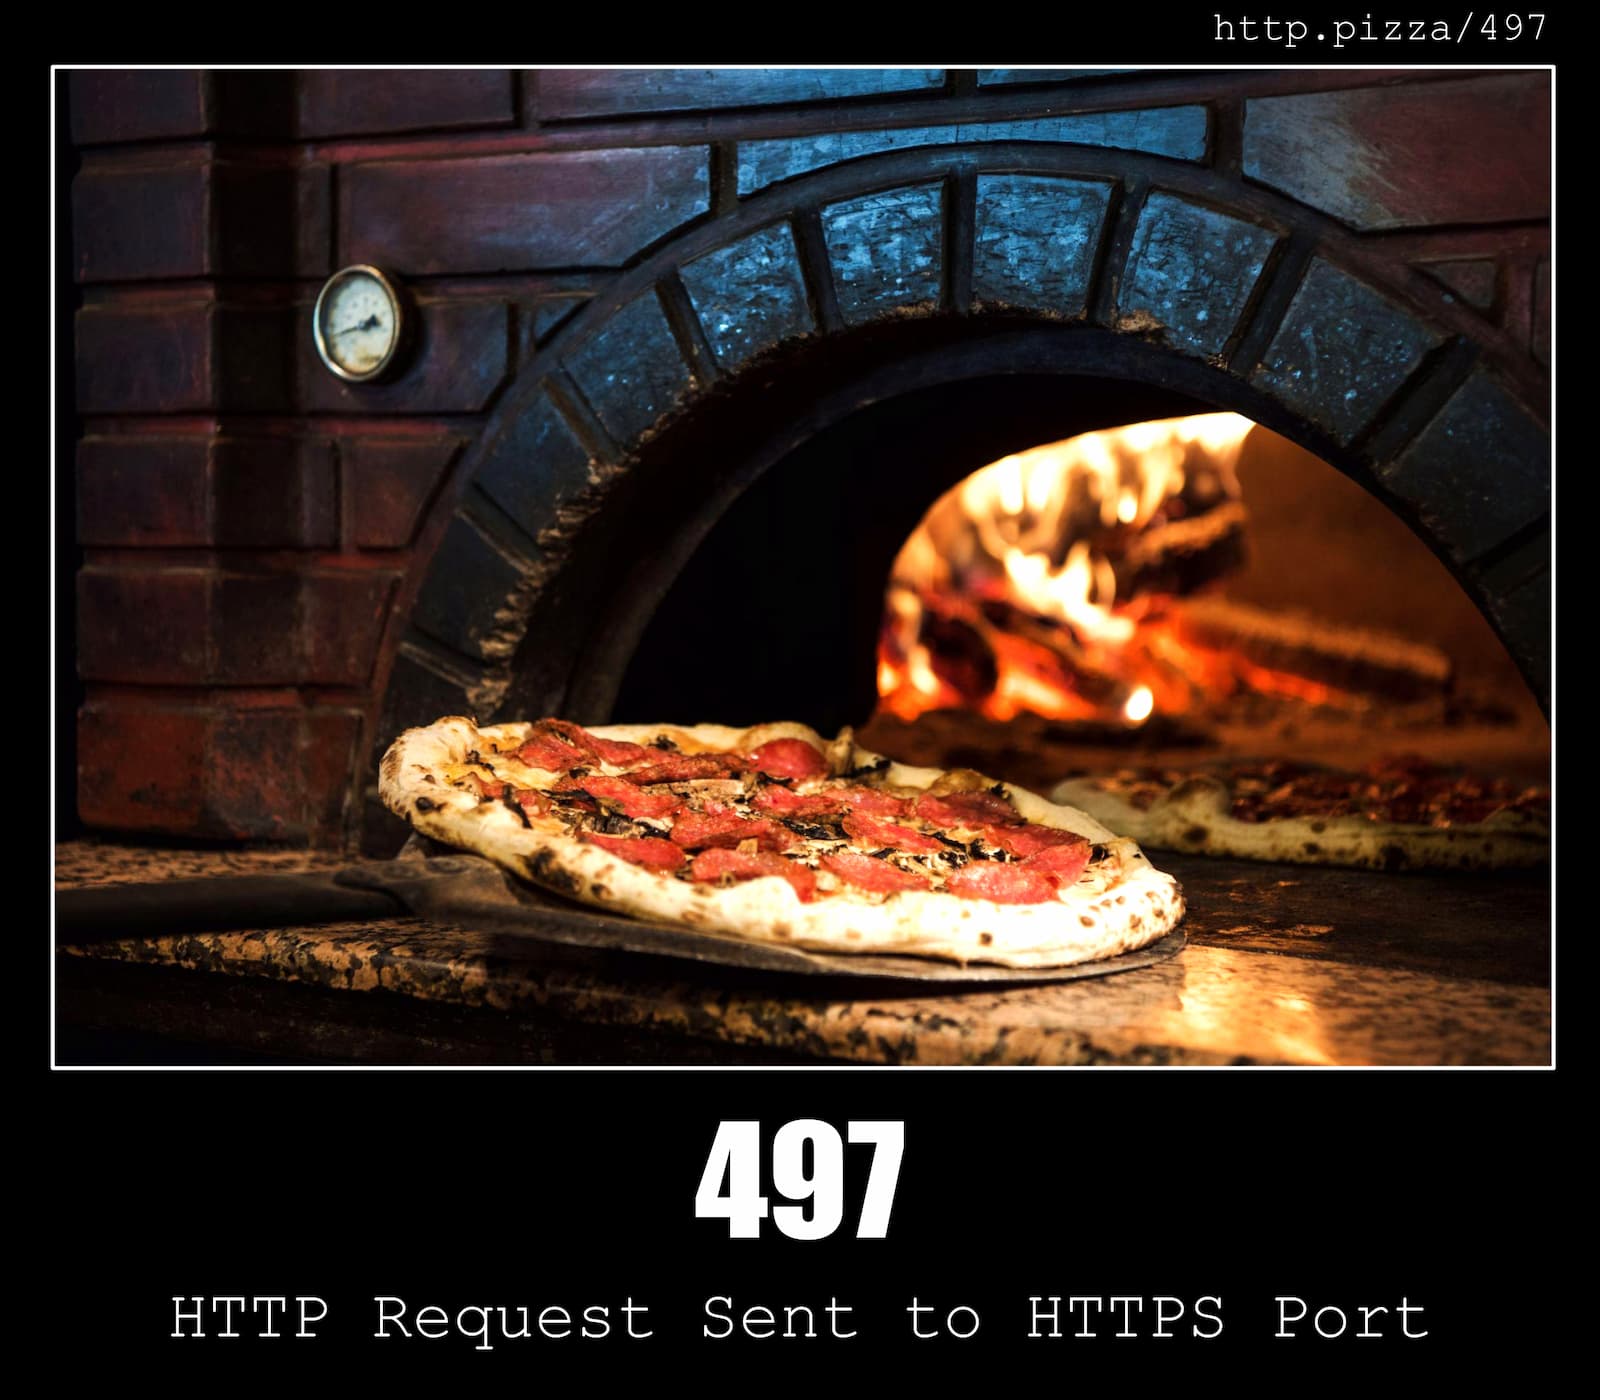 HTTP Status Code 497 HTTP Request Sent to HTTPS Port & Pizzas